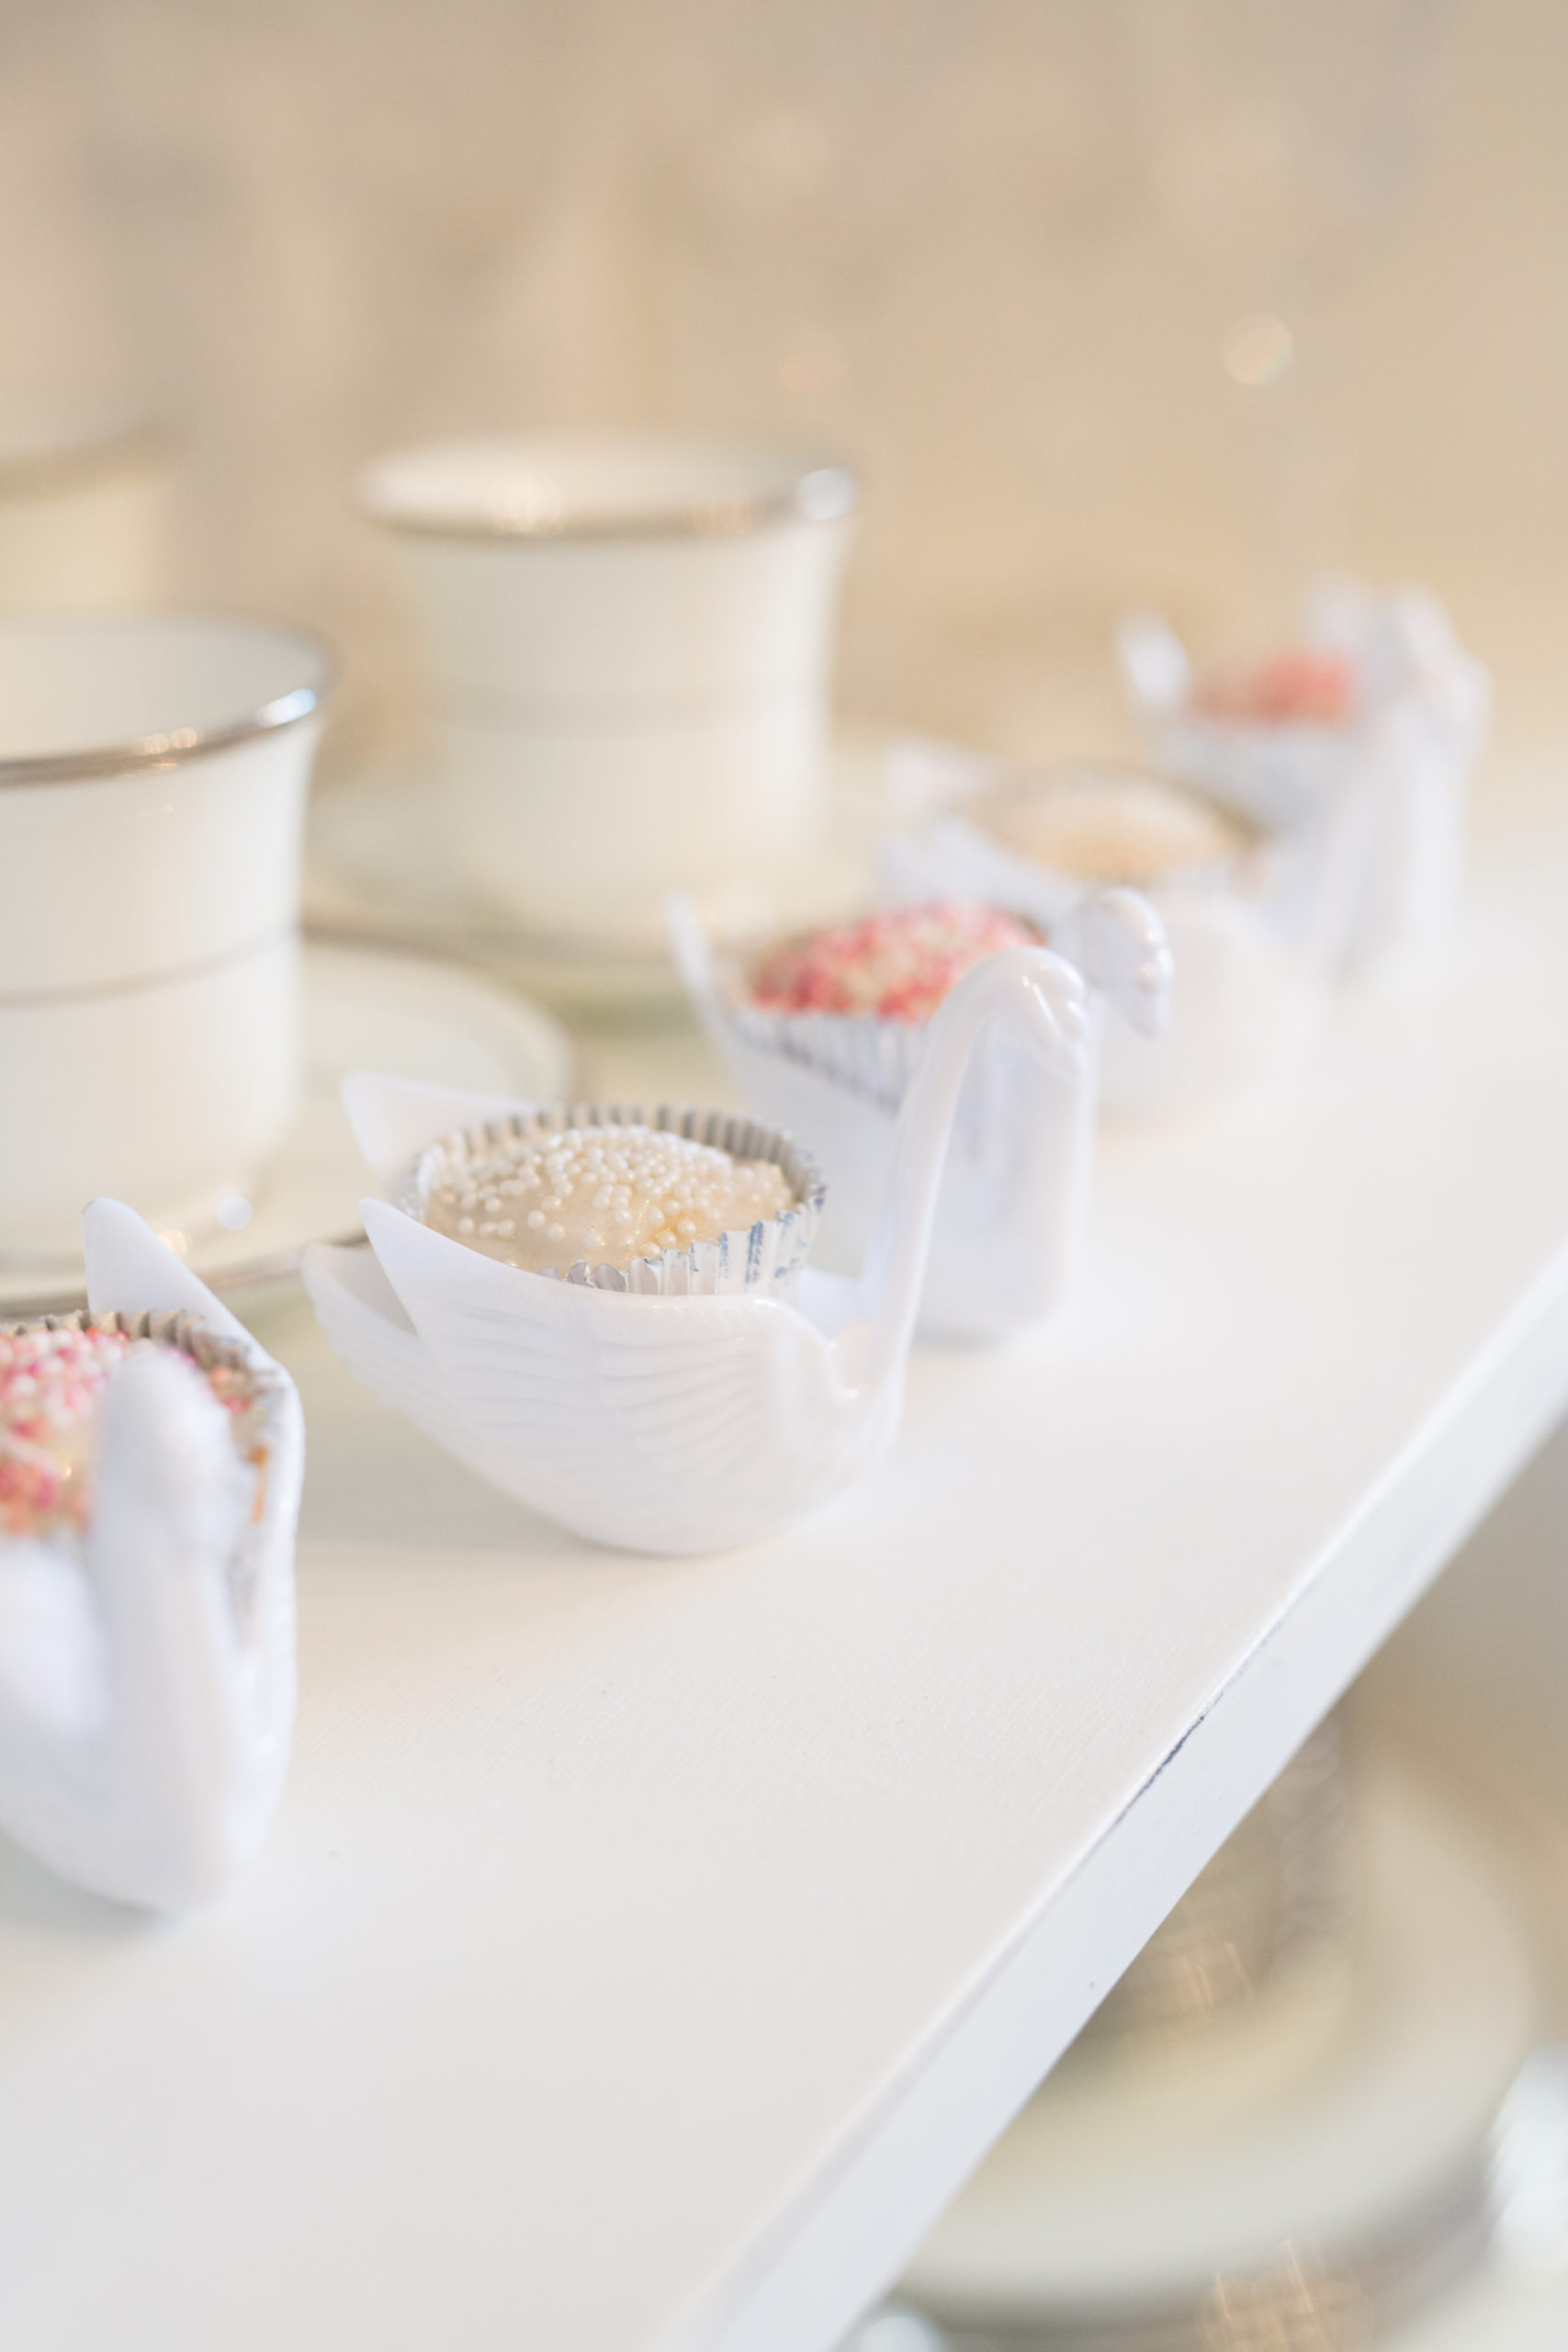 Pretty white and pink cupcake treats nestled in swans for the baby welcome